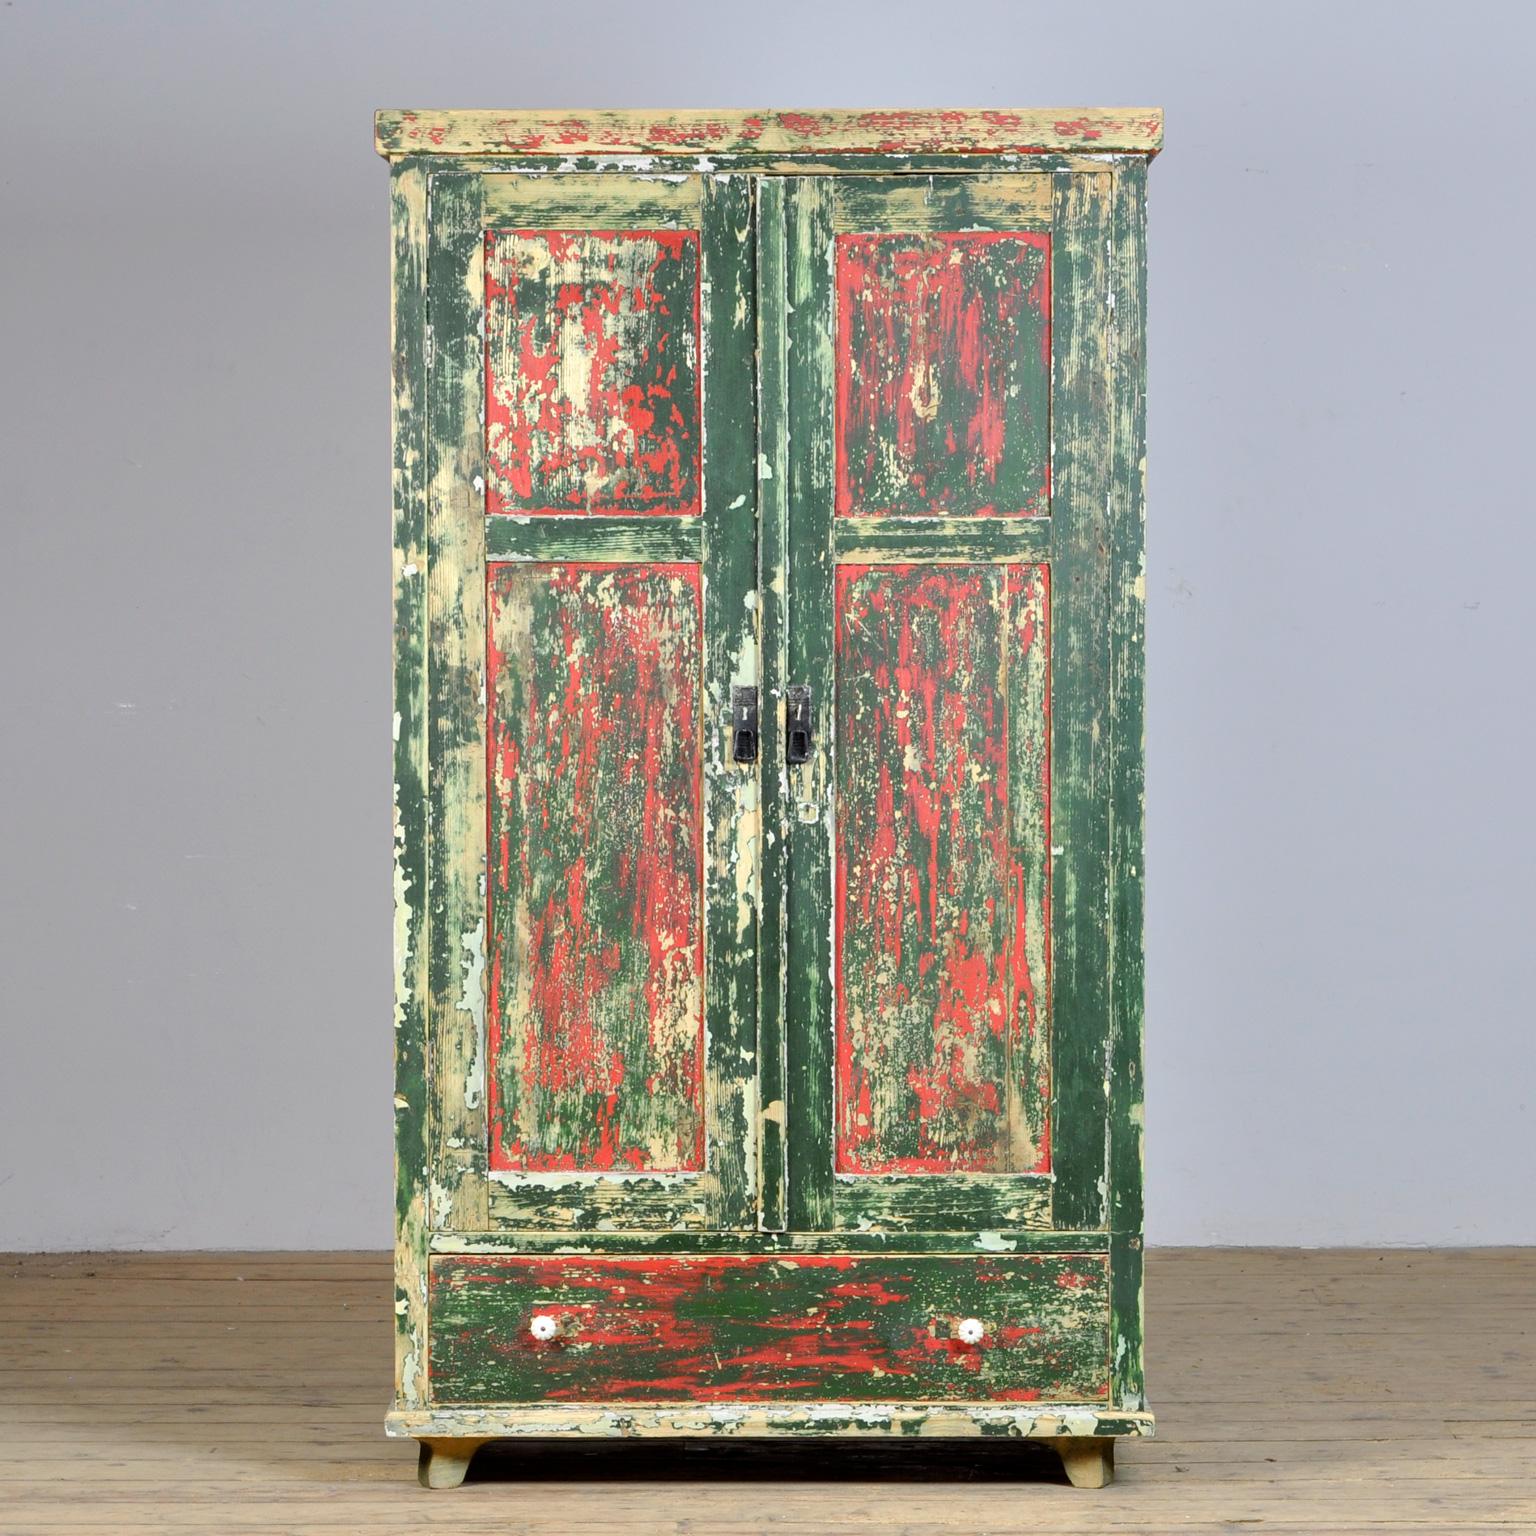 This brocante cabinet comes from Hungary, circa 1920. The cabinet is made of pine wood and has acquired a weathered patina over the years due to the different layers of paint. The cabinet has three shelves. If desired, these can be removed to use